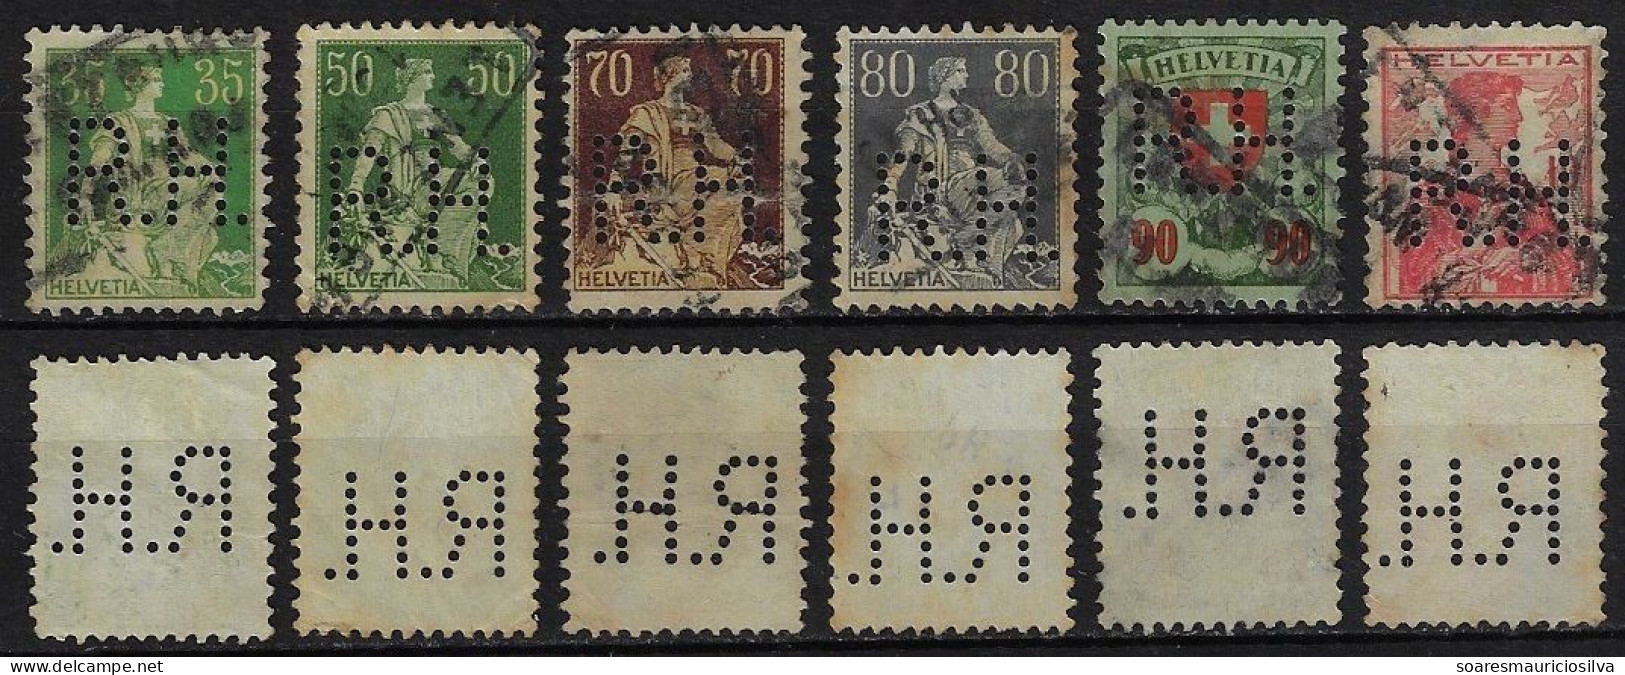 Switzerland 1908/1925 6 Stamp Perfin R.H. By Roth & Henkel (Hero AG) + Rud. Hirt & Sohne From Lenzburg Lochung Perfore - Perfins